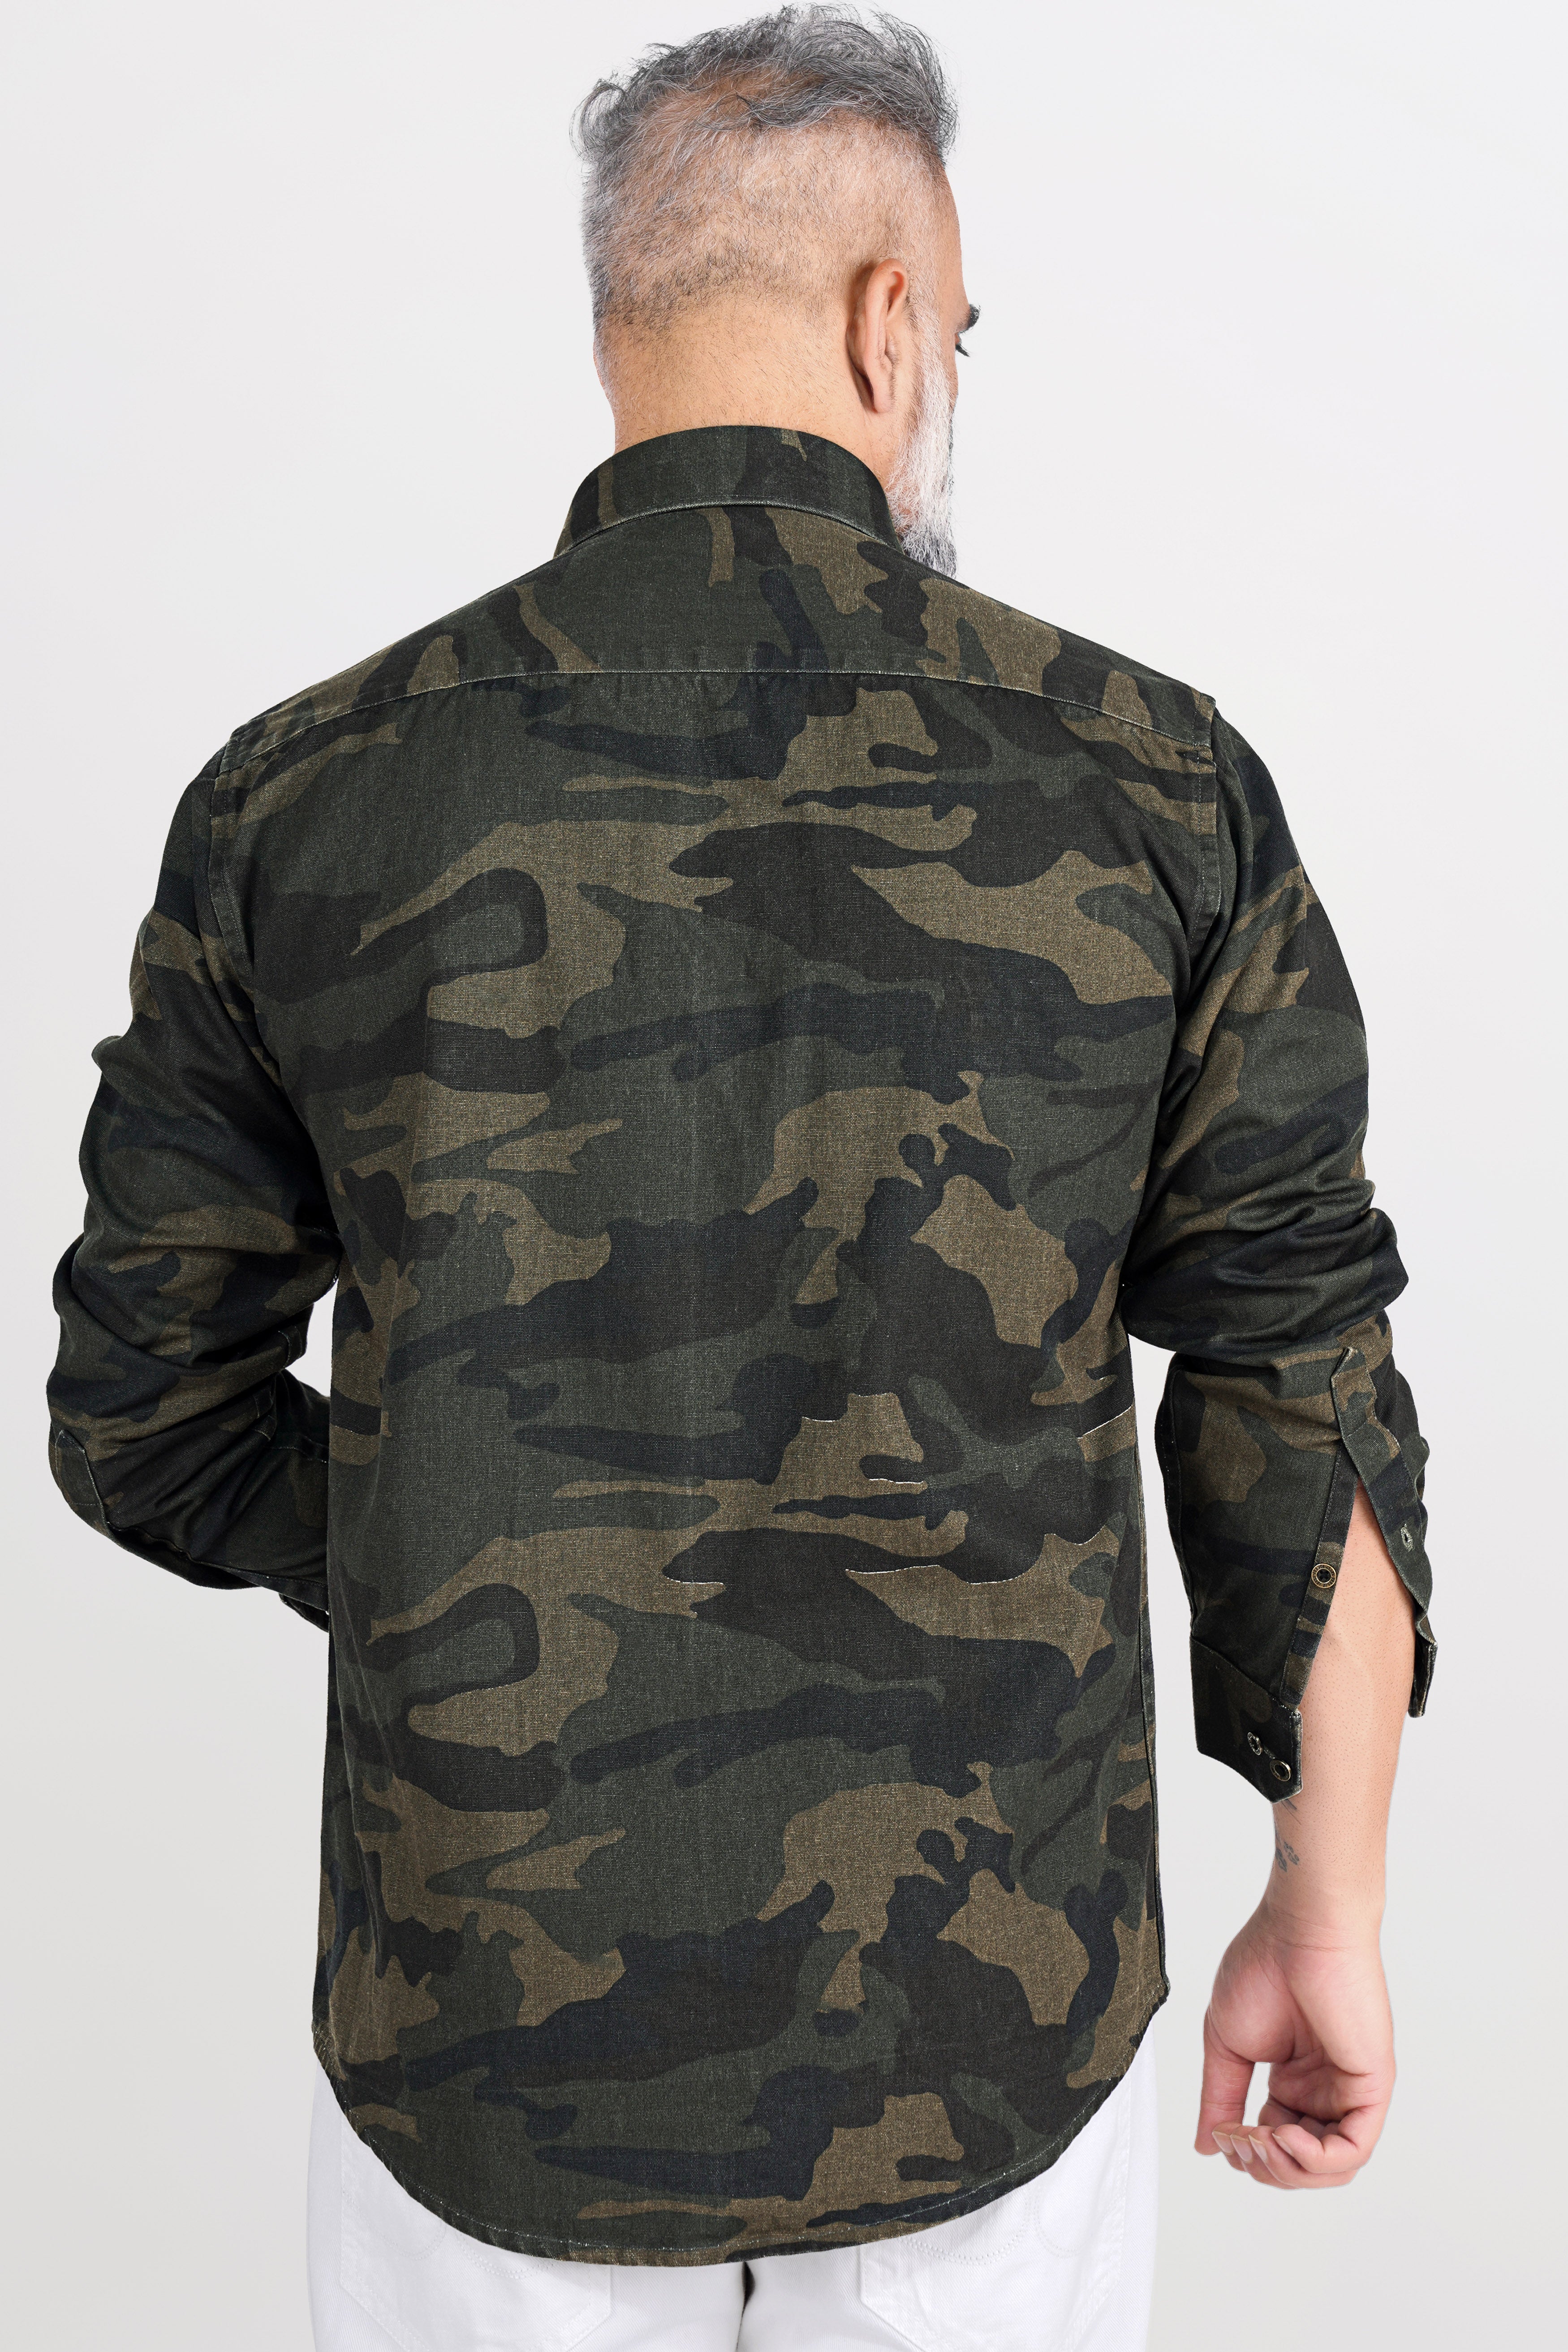 Hemlock Brown with Charcoal Green Camouflage Royal Oxford Shirt